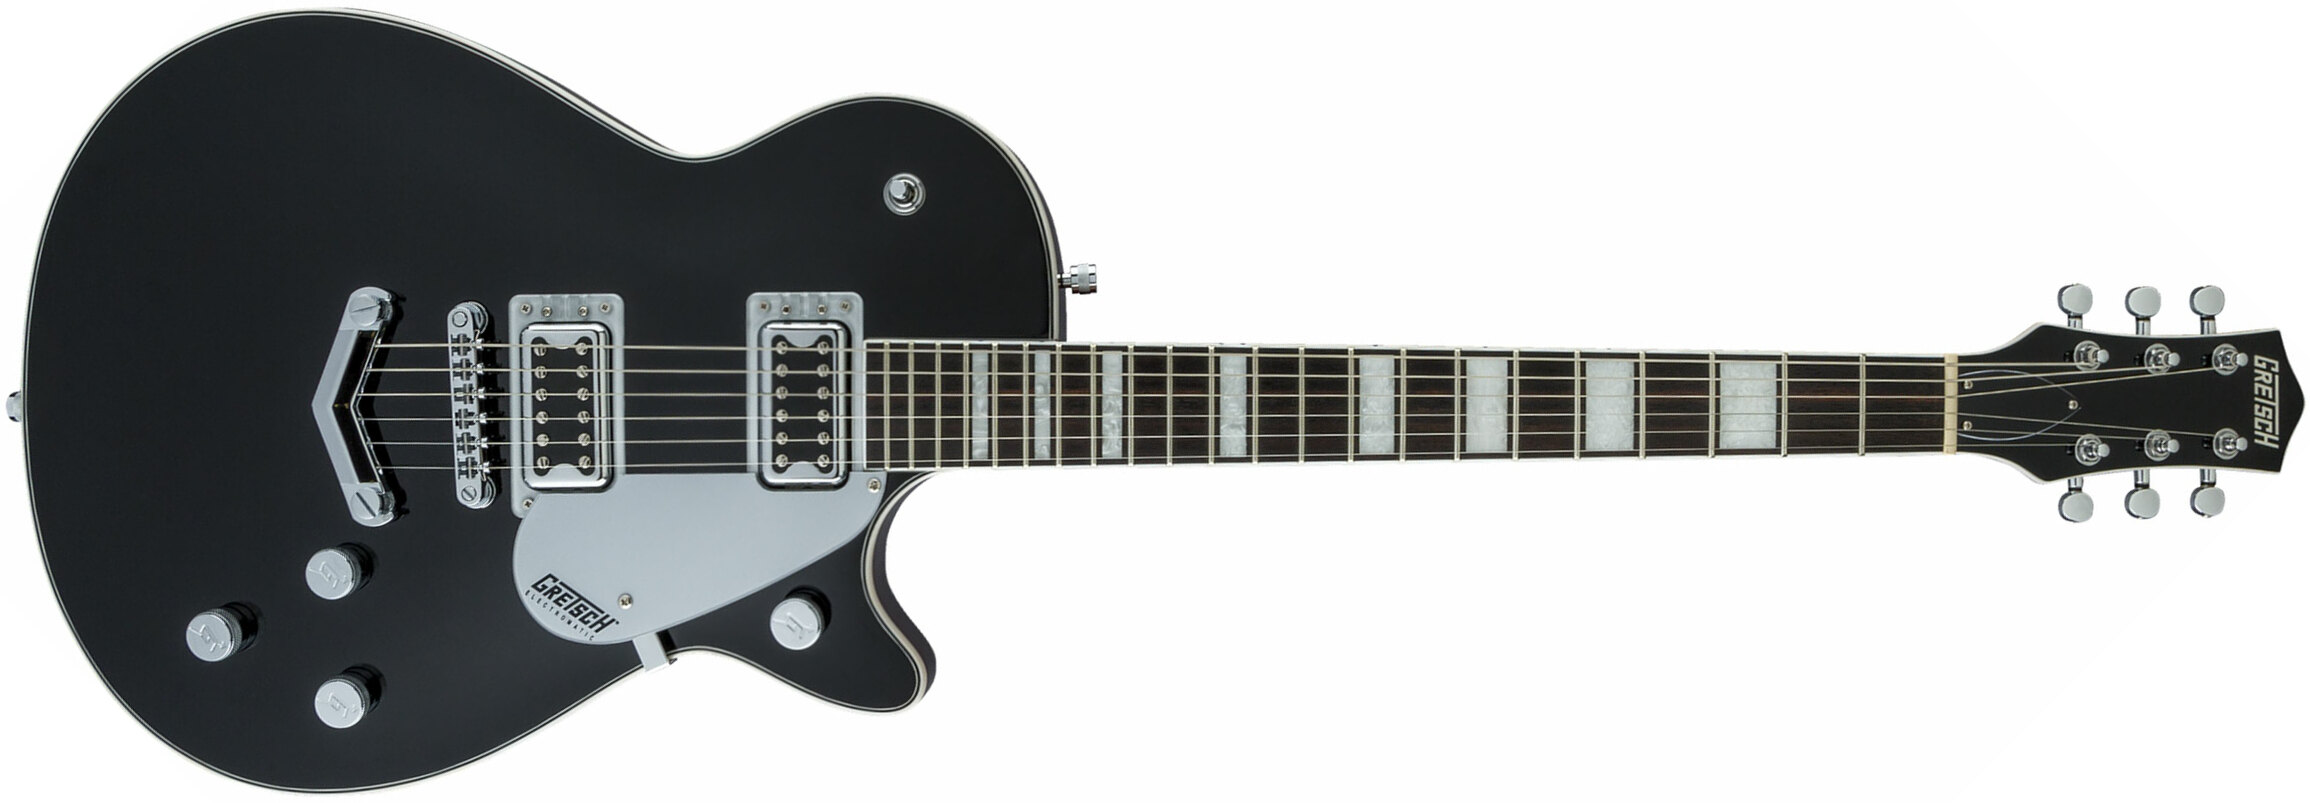 Gretsch G5220 Electromatic Jet Bt V-stoptail Hh Ht Wal - Black - Single cut electric guitar - Main picture